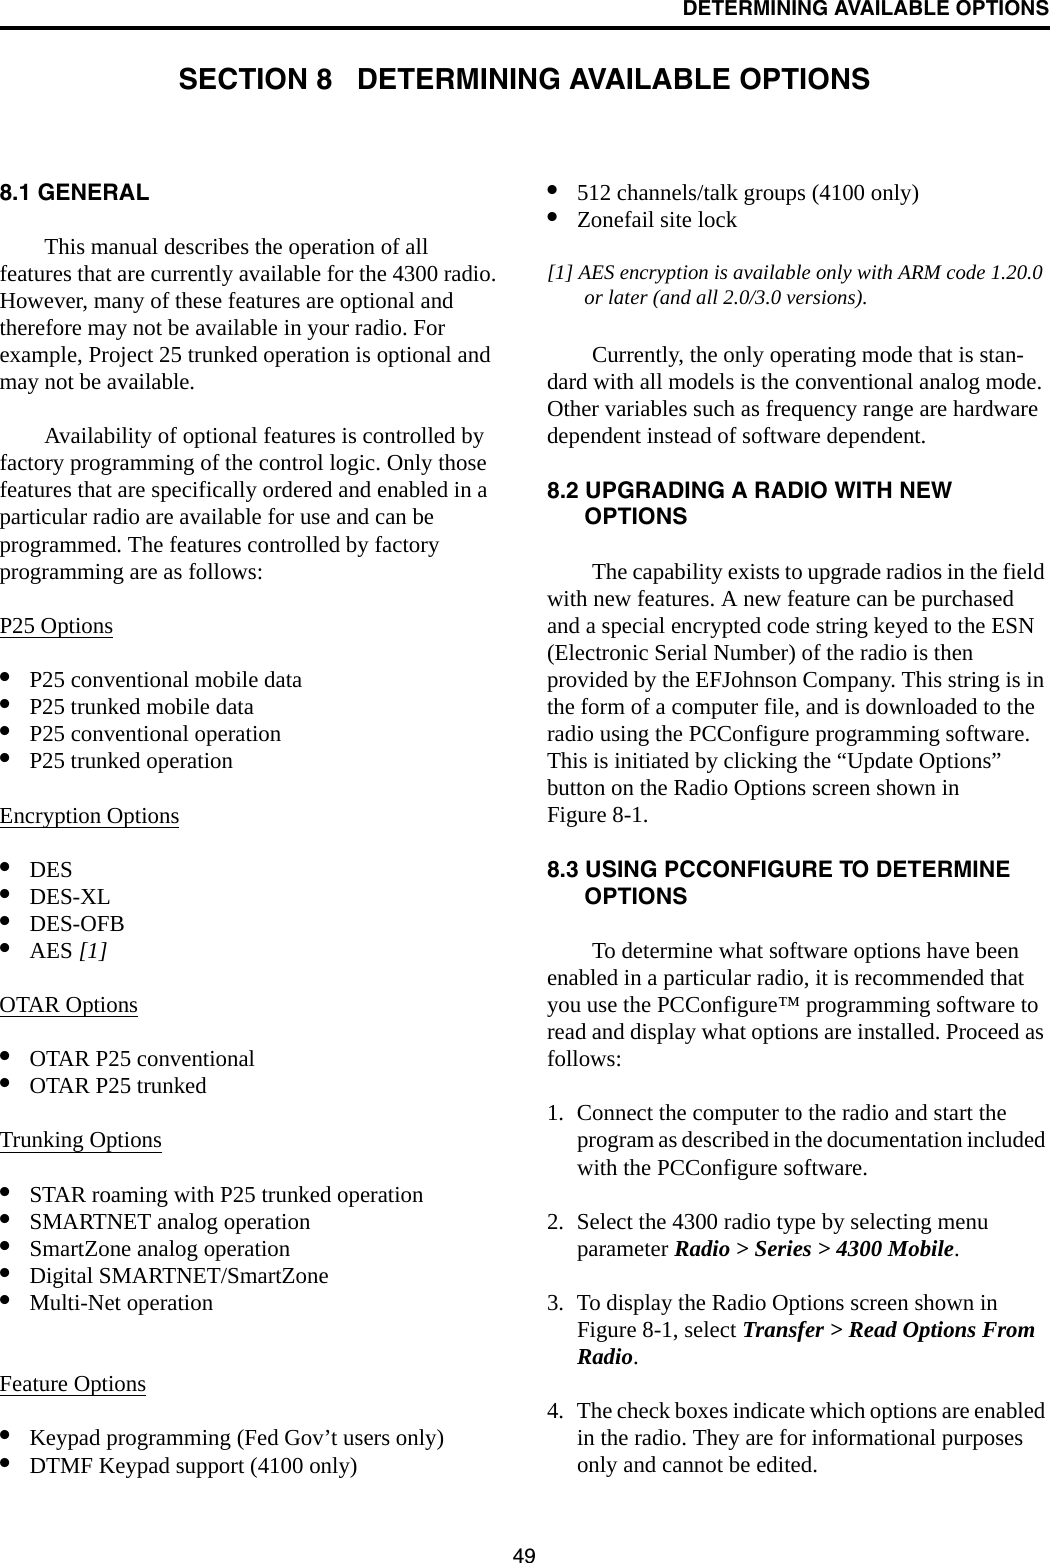 49DETERMINING AVAILABLE OPTIONSSECTION 8   DETERMINING AVAILABLE OPTIONS8.1 GENERALThis manual describes the operation of all features that are currently available for the 4300 radio. However, many of these features are optional and therefore may not be available in your radio. For example, Project 25 trunked operation is optional and may not be available.Availability of optional features is controlled by factory programming of the control logic. Only those features that are specifically ordered and enabled in a particular radio are available for use and can be programmed. The features controlled by factory programming are as follows:P25 Options•P25 conventional mobile data•P25 trunked mobile data•P25 conventional operation•P25 trunked operationEncryption Options•DES •DES-XL •DES-OFB•AES [1]OTAR Options•OTAR P25 conventional•OTAR P25 trunkedTrunking Options•STAR roaming with P25 trunked operation•SMARTNET analog operation•SmartZone analog operation•Digital SMARTNET/SmartZone•Multi-Net operationFeature Options•Keypad programming (Fed Gov’t users only)•DTMF Keypad support (4100 only)•512 channels/talk groups (4100 only)•Zonefail site lock[1] AES encryption is available only with ARM code 1.20.0 or later (and all 2.0/3.0 versions). Currently, the only operating mode that is stan-dard with all models is the conventional analog mode. Other variables such as frequency range are hardware dependent instead of software dependent.8.2 UPGRADING A RADIO WITH NEW OPTIONSThe capability exists to upgrade radios in the field with new features. A new feature can be purchased and a special encrypted code string keyed to the ESN (Electronic Serial Number) of the radio is then provided by the EFJohnson Company. This string is in the form of a computer file, and is downloaded to the radio using the PCConfigure programming software. This is initiated by clicking the “Update Options” button on the Radio Options screen shown in Figure 8-1.8.3 USING PCCONFIGURE TO DETERMINE OPTIONSTo determine what software options have been enabled in a particular radio, it is recommended that you use the PCConfigure™ programming software to read and display what options are installed. Proceed as follows:1. Connect the computer to the radio and start the program as described in the documentation included with the PCConfigure software.2. Select the 4300 radio type by selecting menu parameter Radio &gt; Series &gt; 4300 Mobile.3. To display the Radio Options screen shown in Figure 8-1, select Transfer &gt; Read Options From Radio.4. The check boxes indicate which options are enabled in the radio. They are for informational purposes only and cannot be edited.